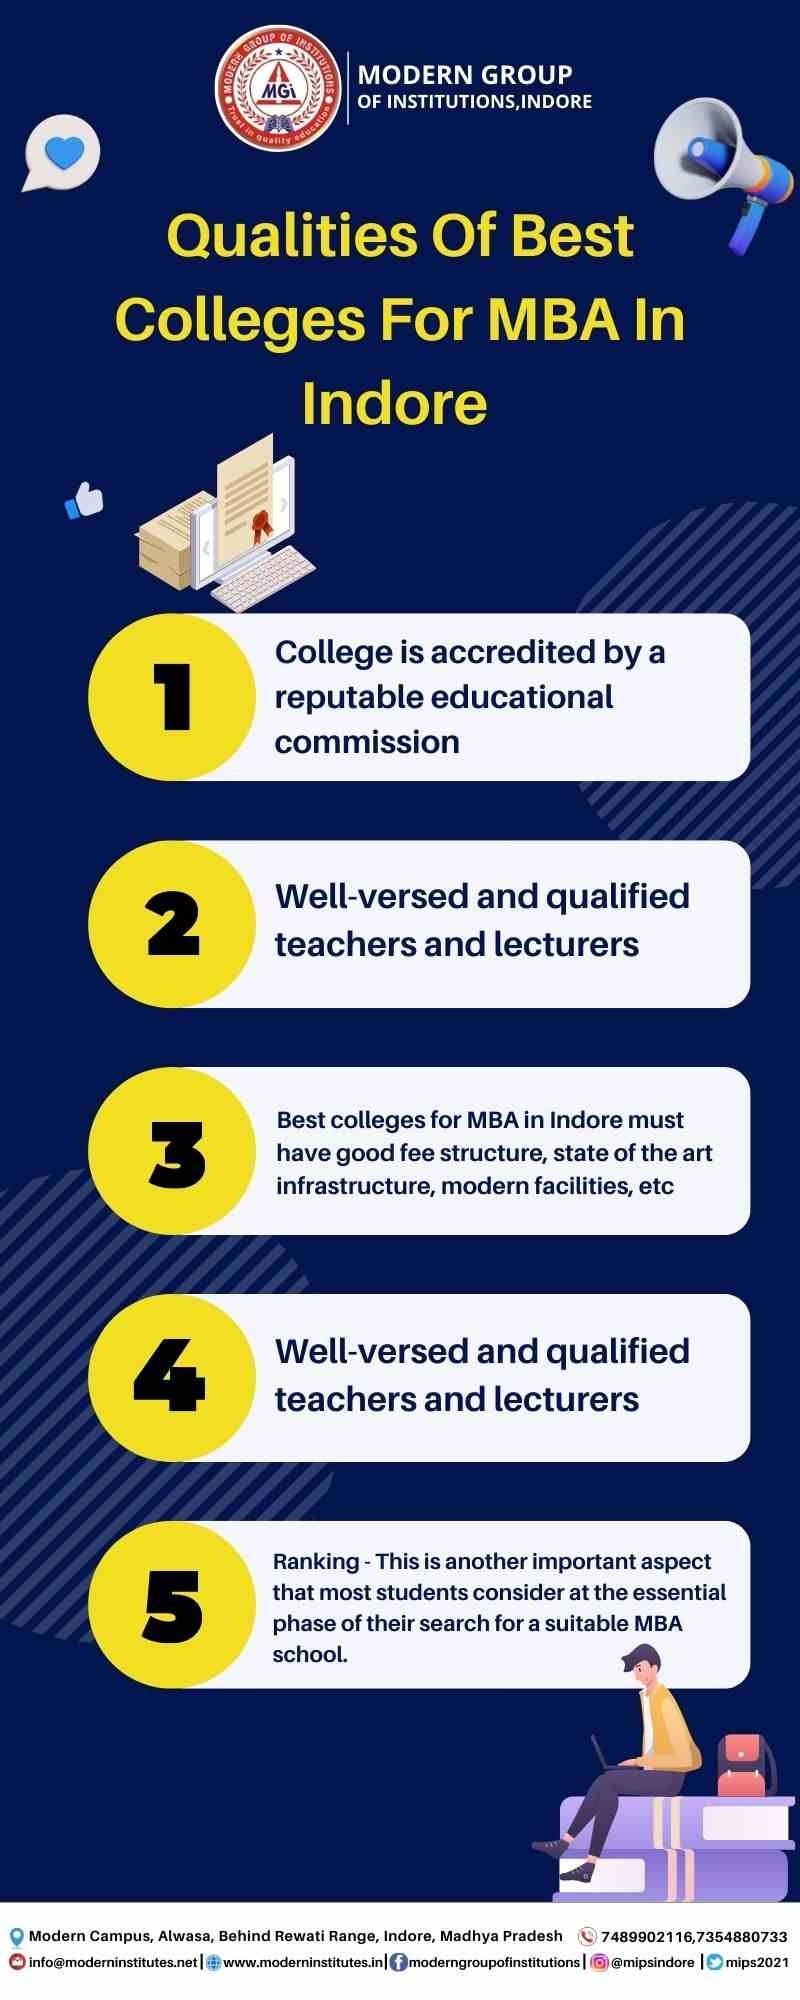 Qualities Of Best Colleges For MBA In Indore